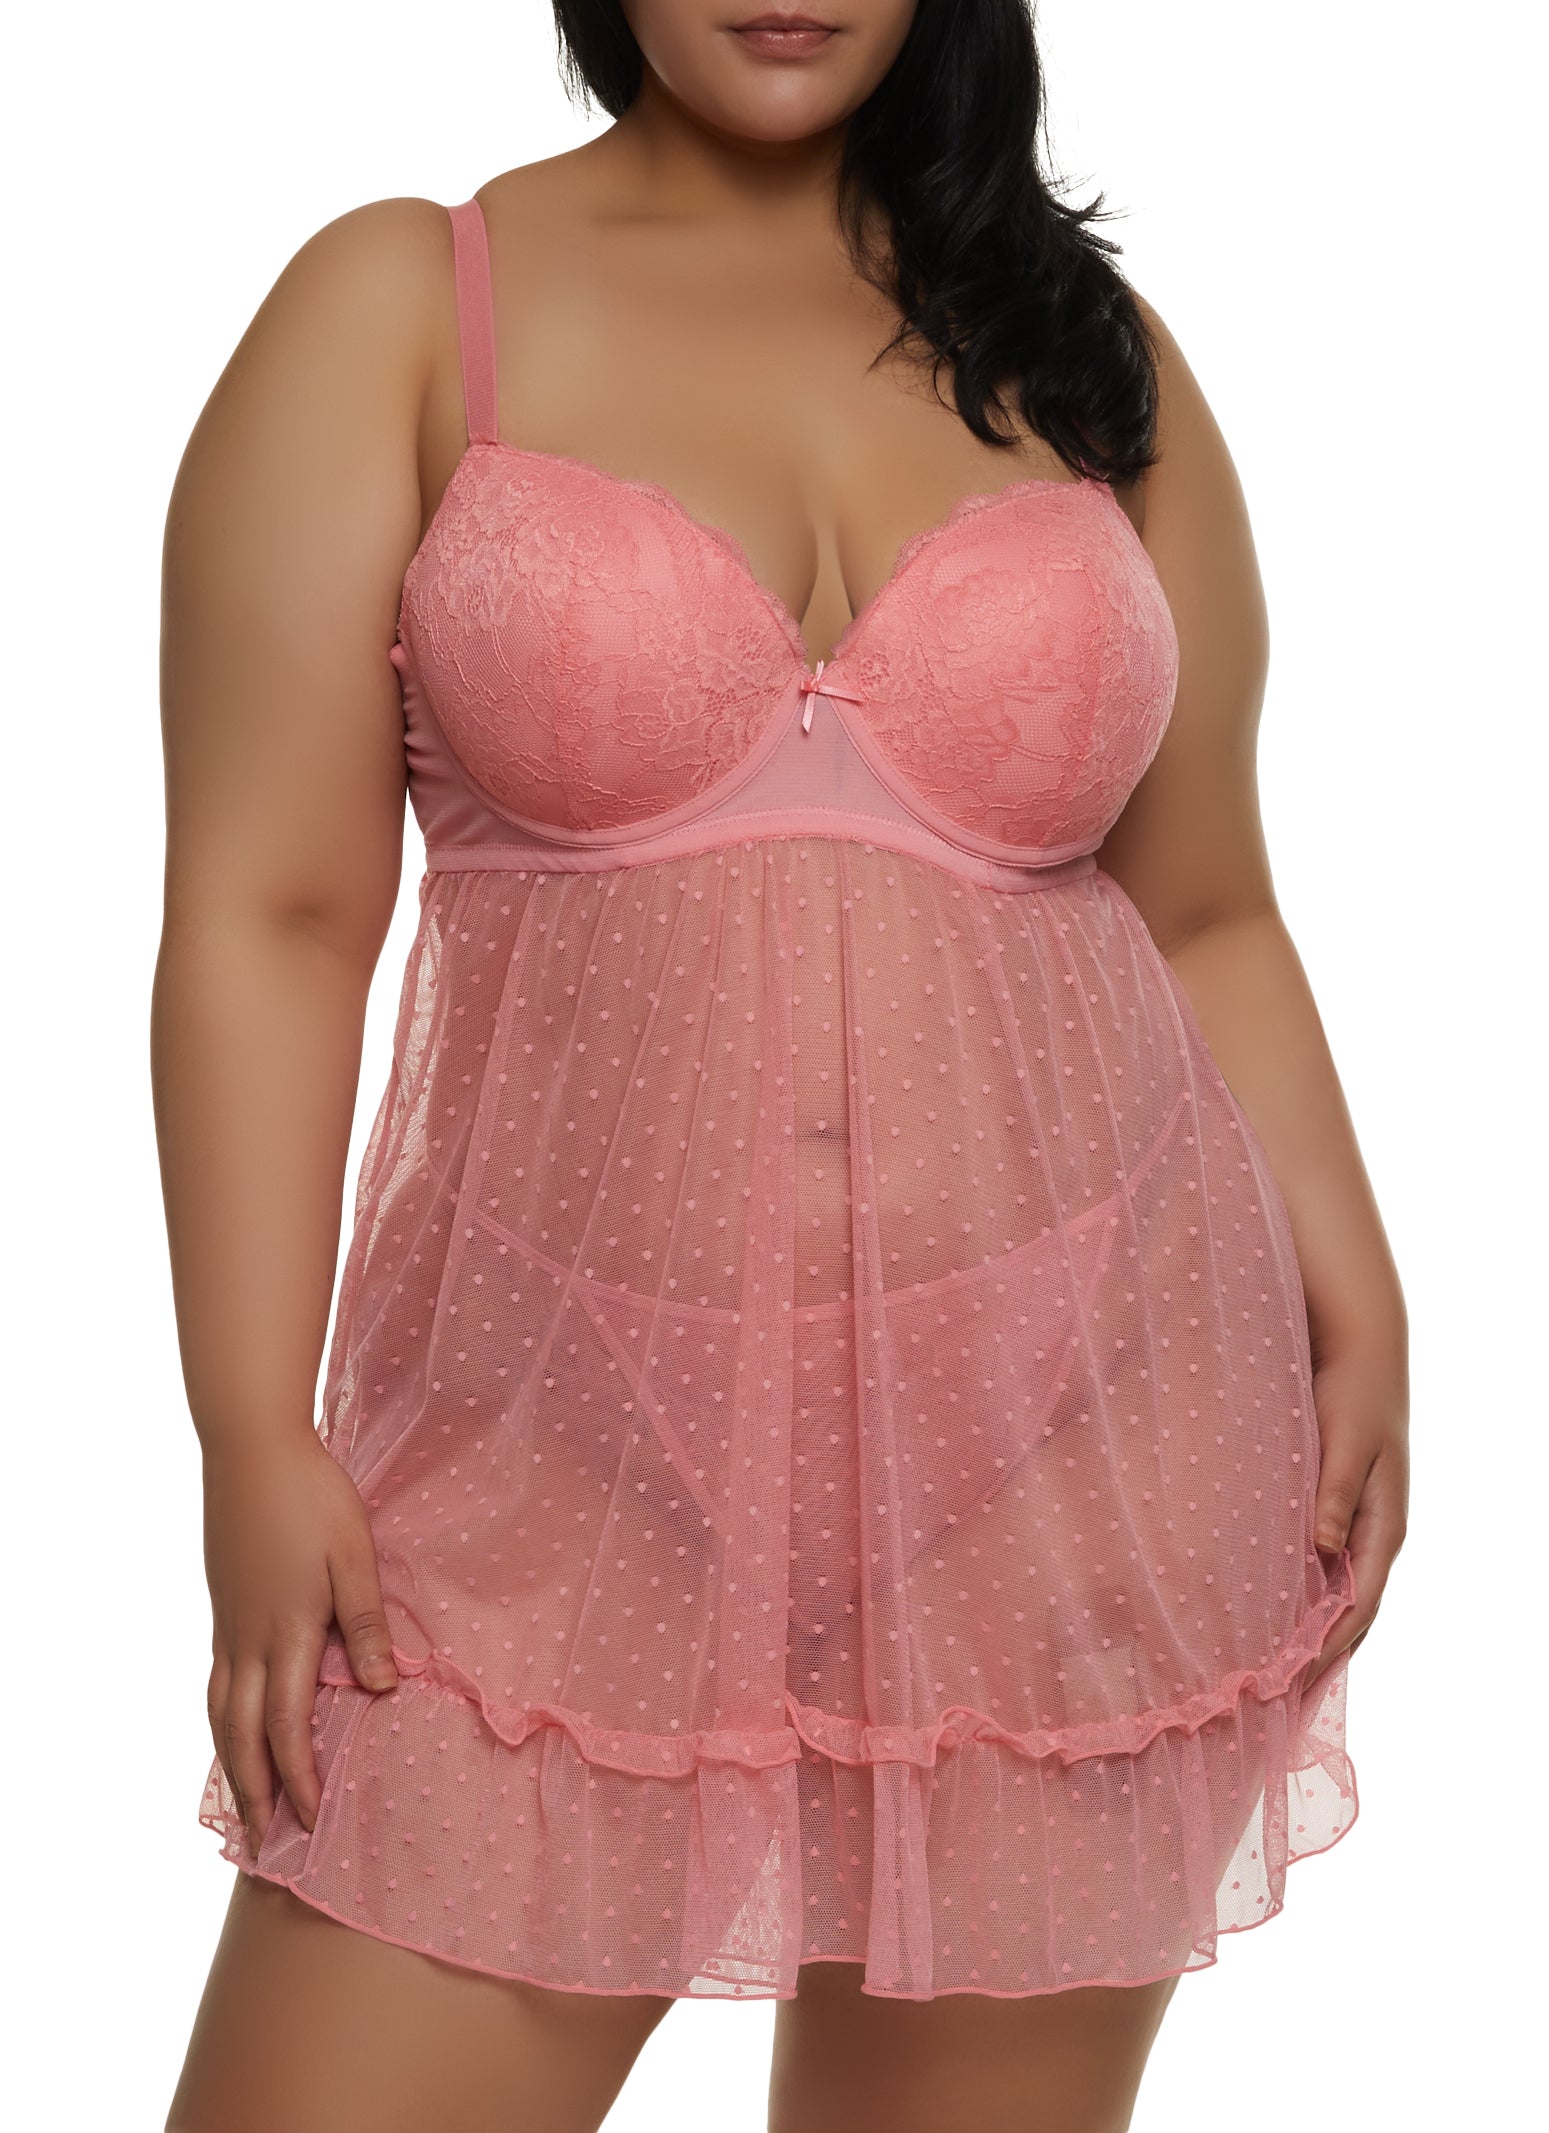 Plus Size Lingerie, Everyday Low Prices